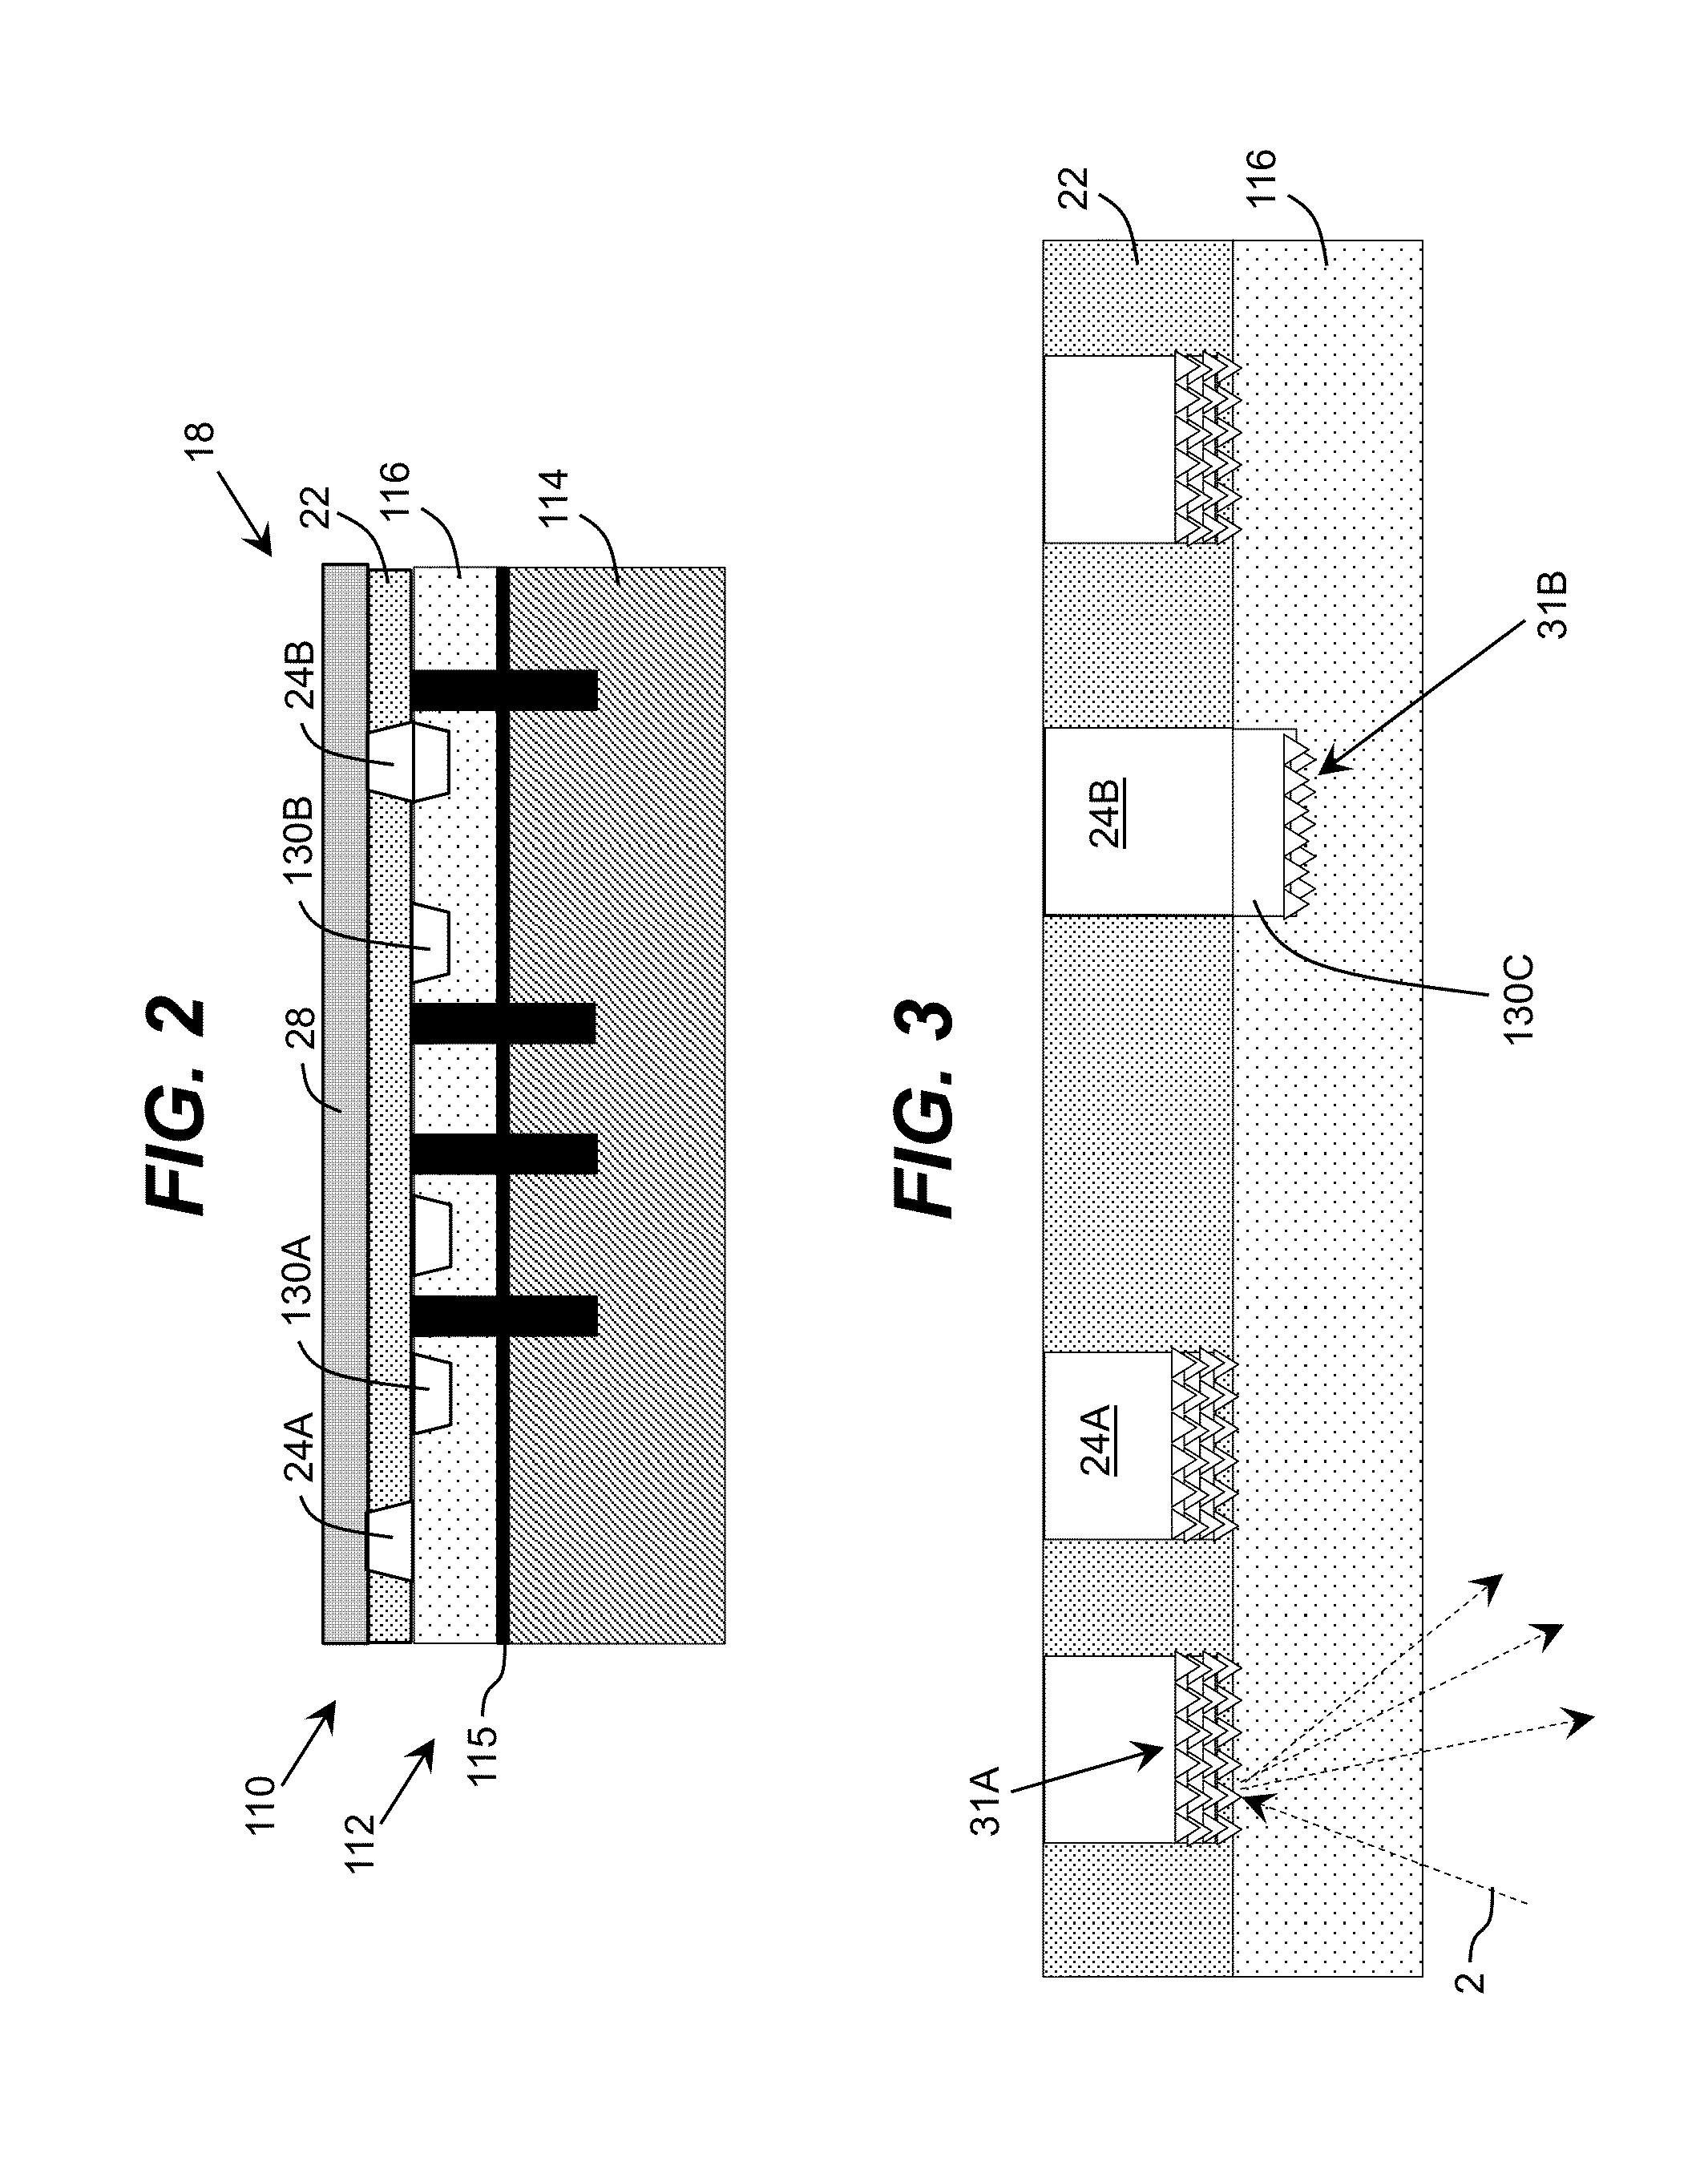 Metallic contact for optoelectronic semiconductor device